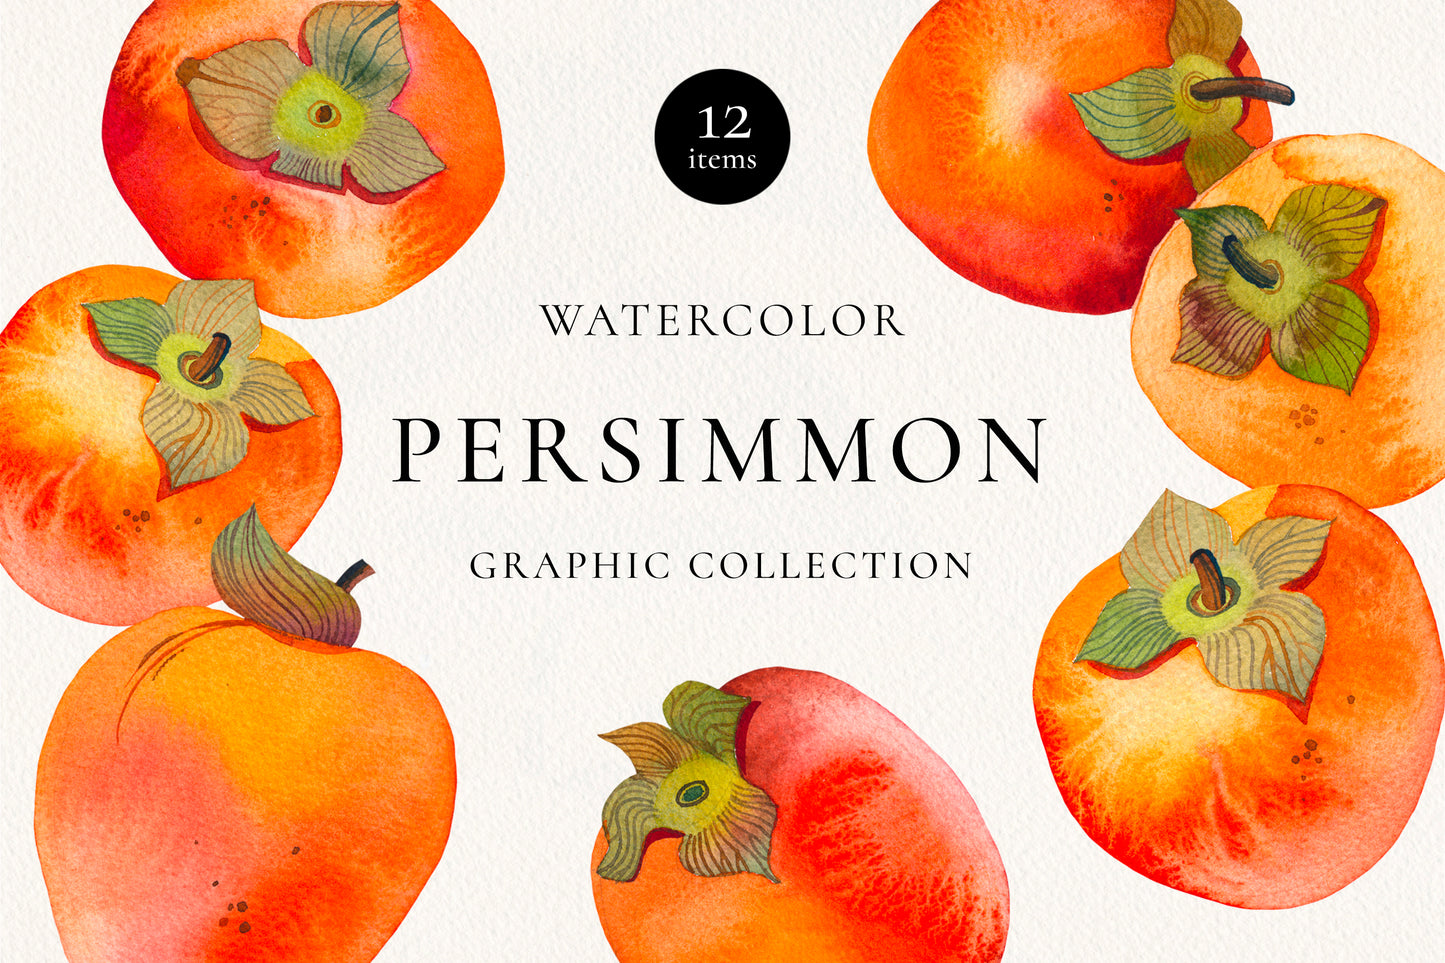 WATERCOLOR PERSIMMON Graphic Collection